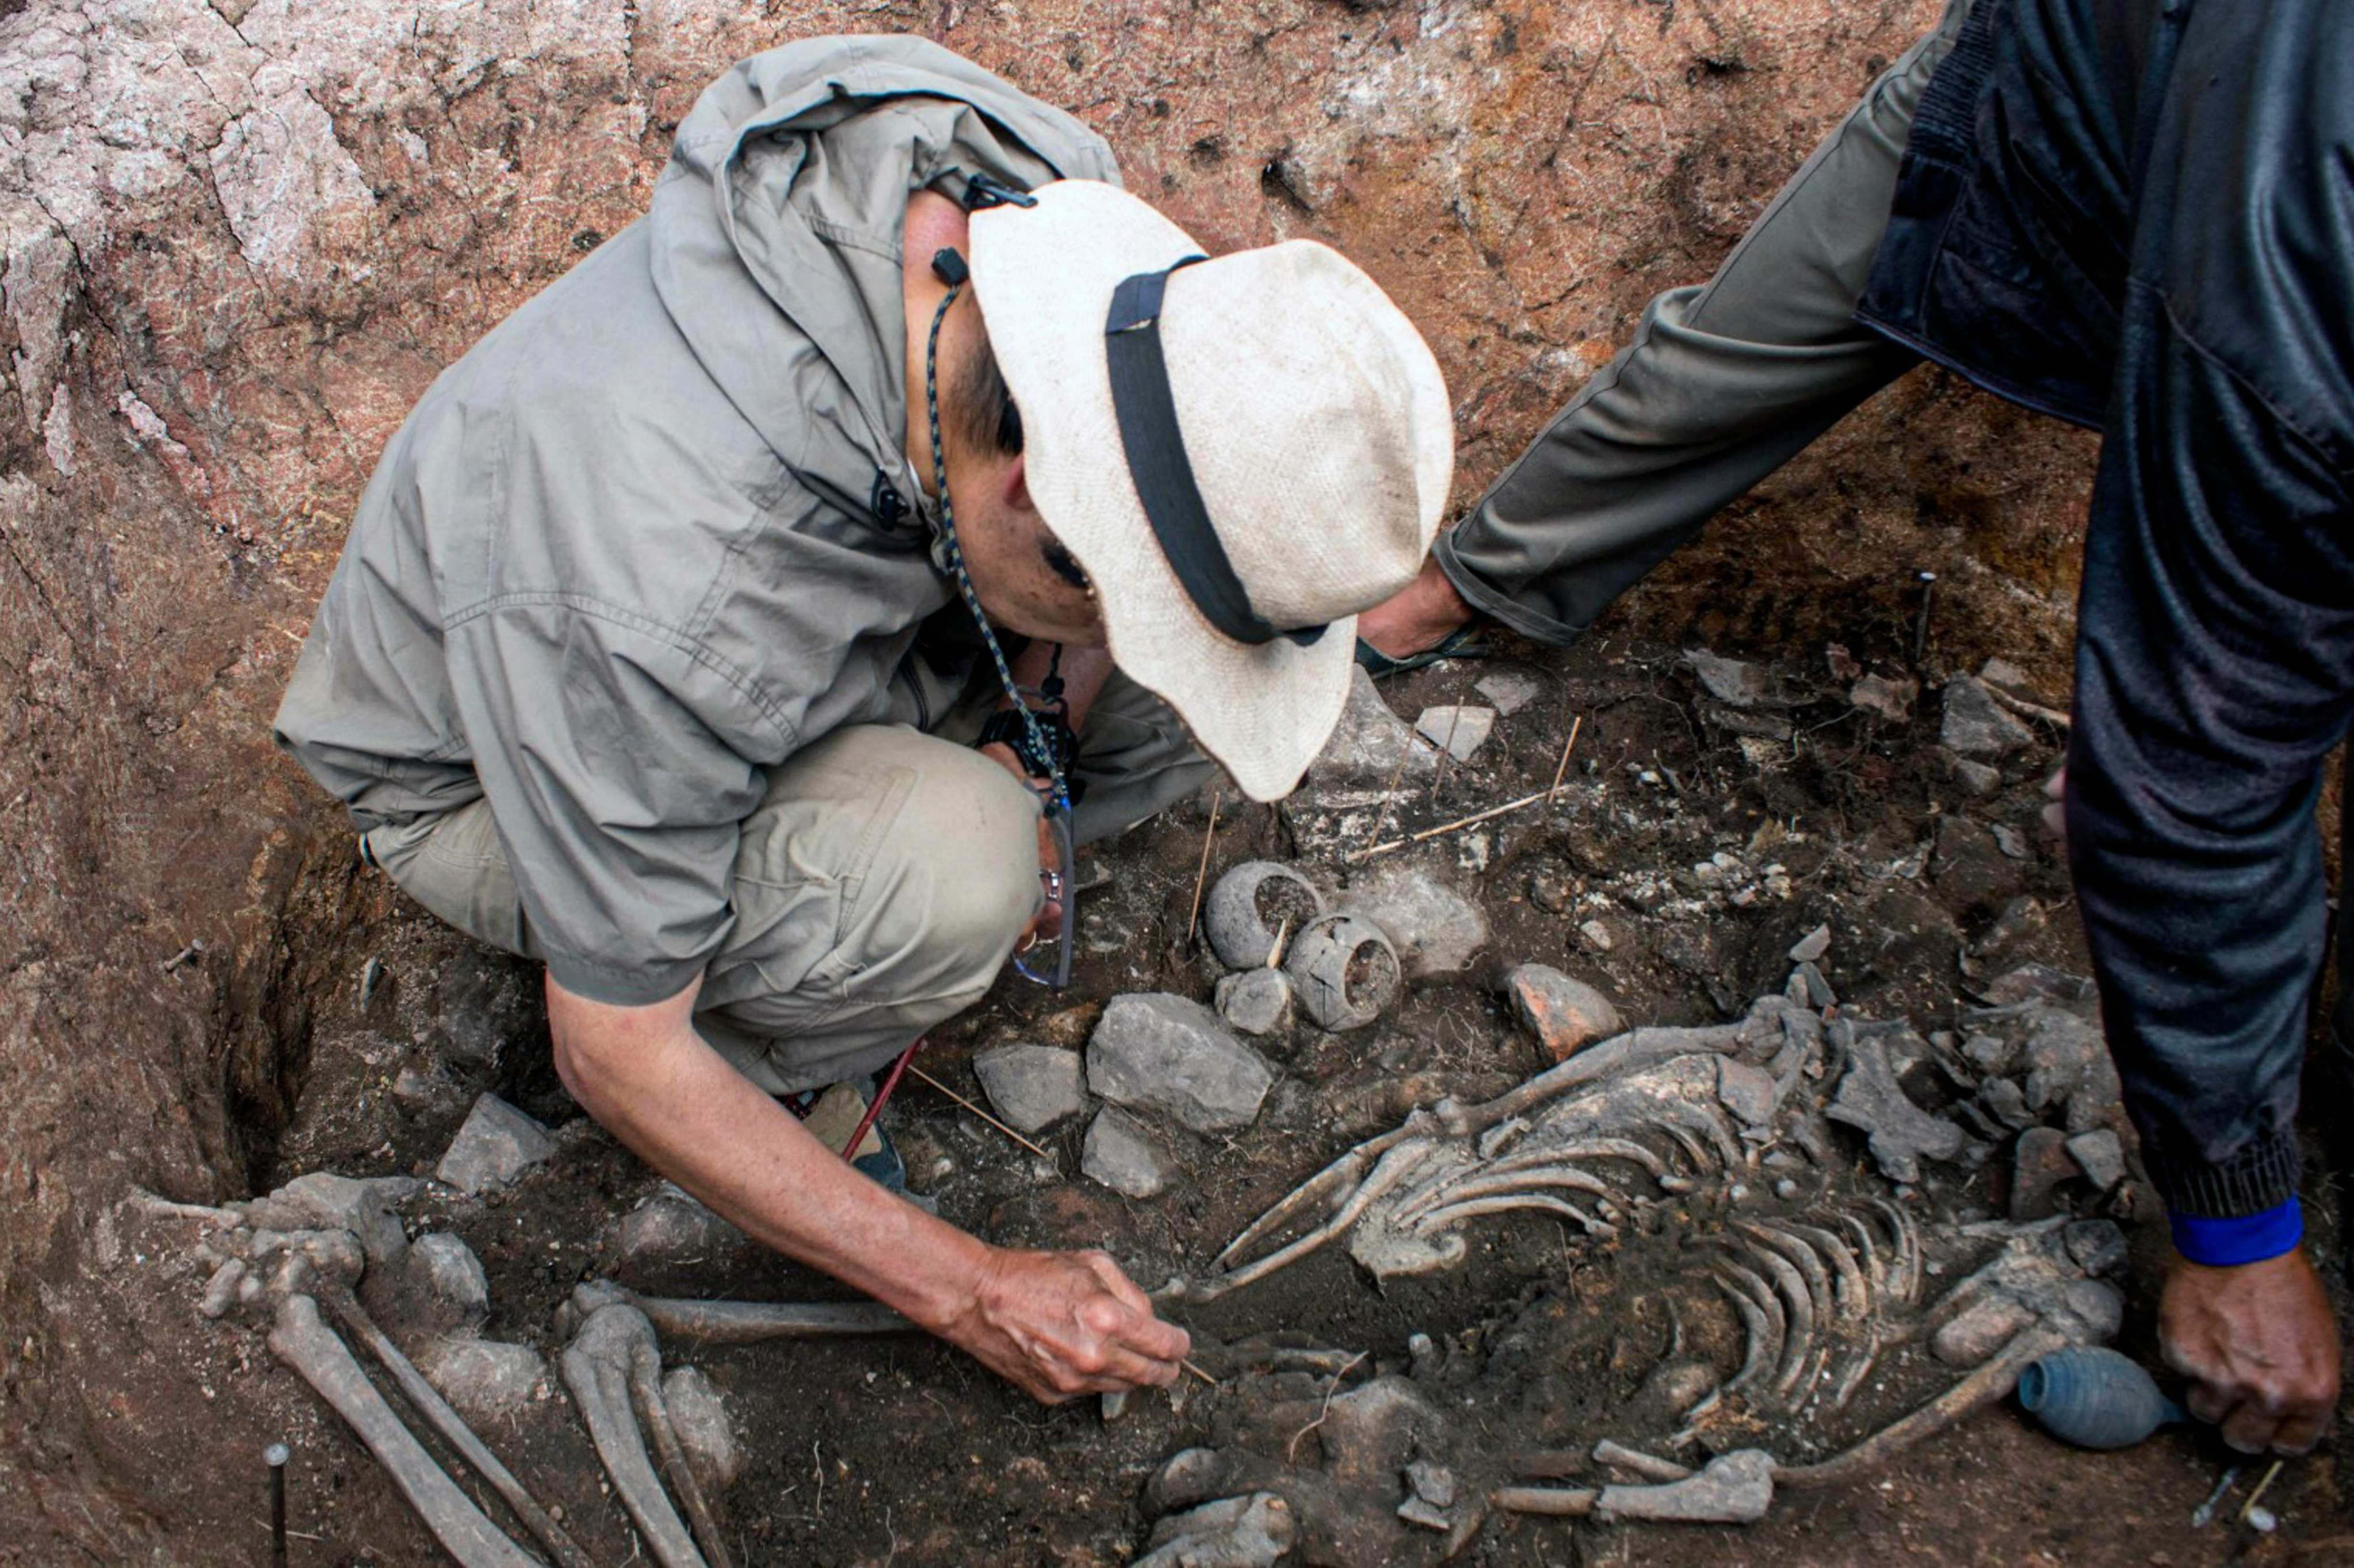 An archaeologist examines the remains of a 3,000-year-old priest’s tomb, found by a group of Japanese and Peruvian archaeologists under a ceremonial site at the Pacopampa archeological site, in Cajamarca, northeast of Peru. Photo: Handout / Peruvian Ministry of Culture / AFP